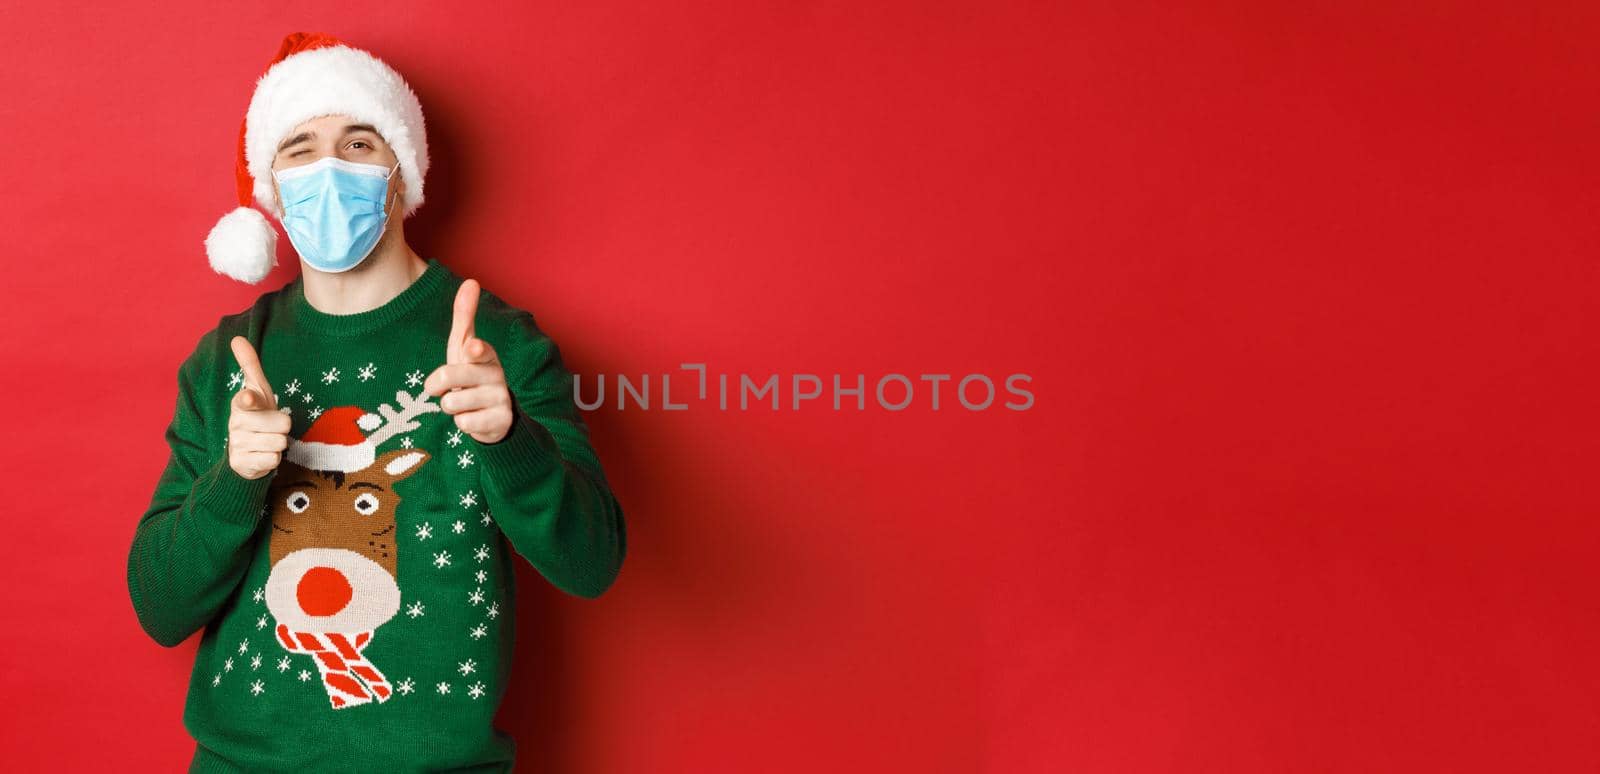 Concept of new year, covid-19 and social distancing. Cheerful man in christmas sweater, medical mask and santa hat, pointing fingers at camera, wishing happy holidays, standing over red background.